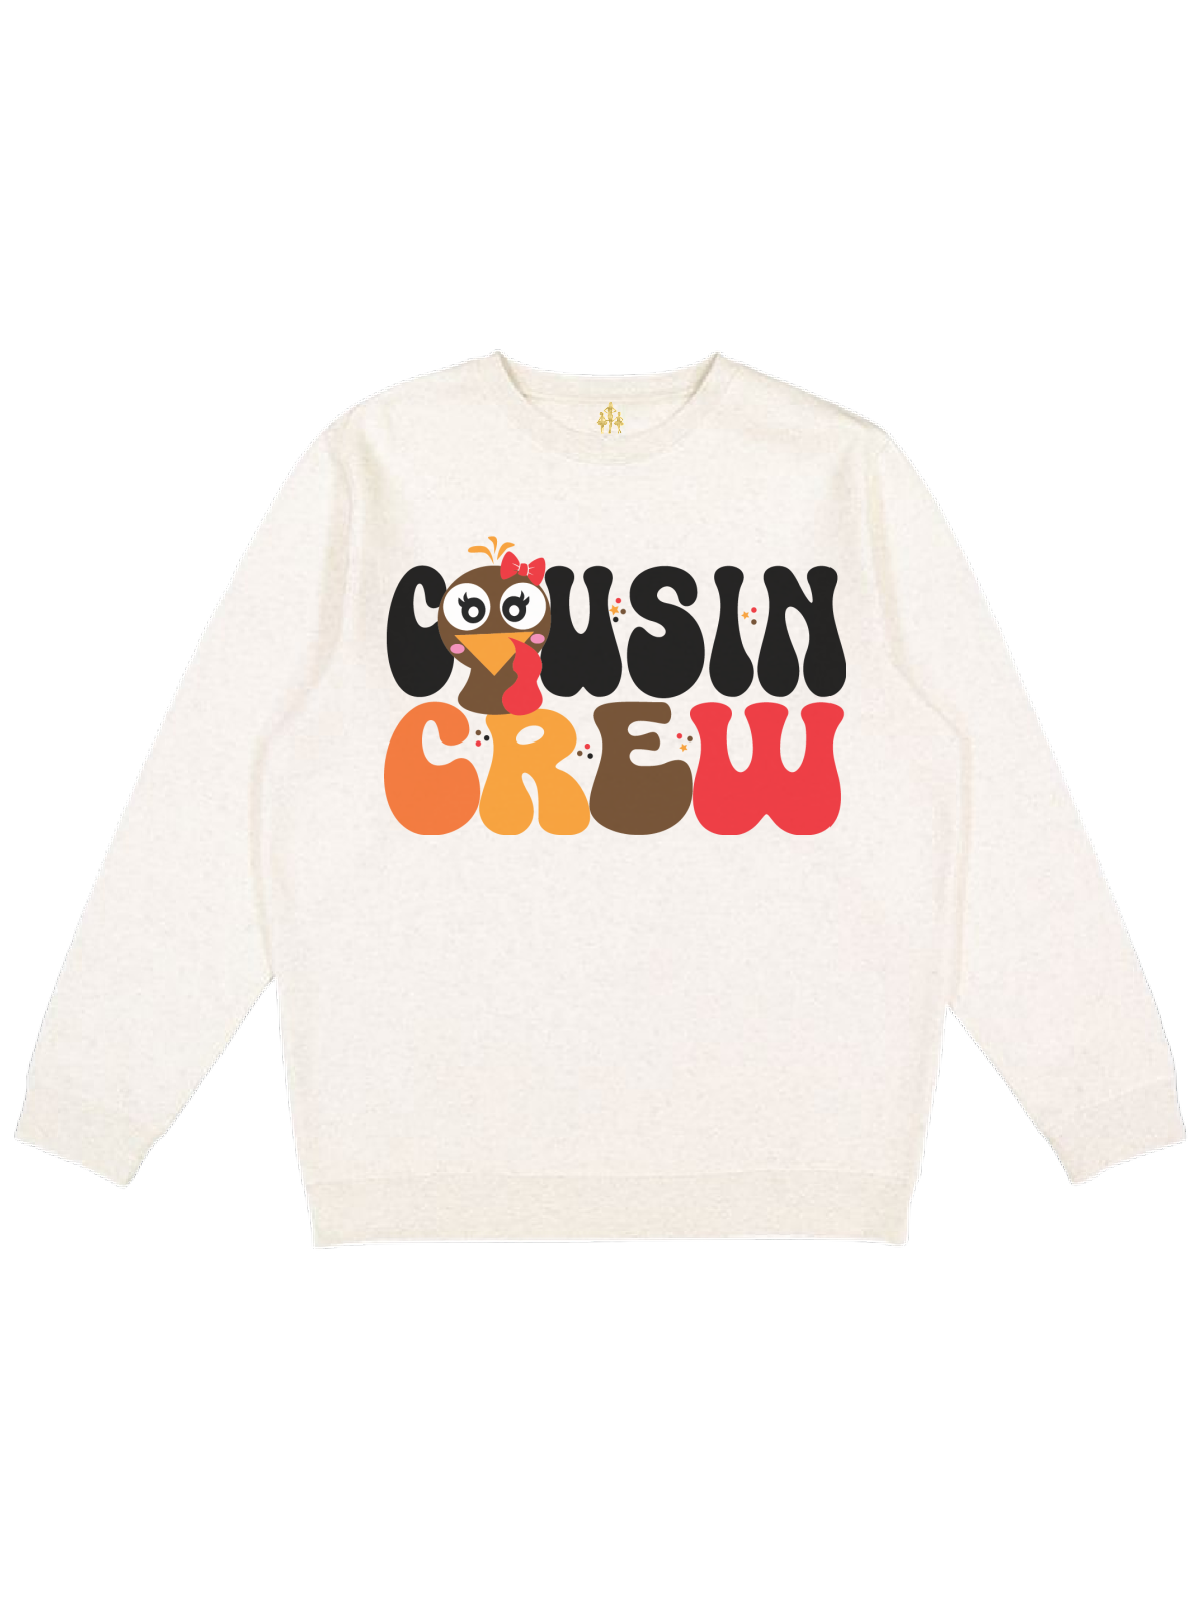 Cousin Crew Matching Family Shirts - Adult Short Sleeve